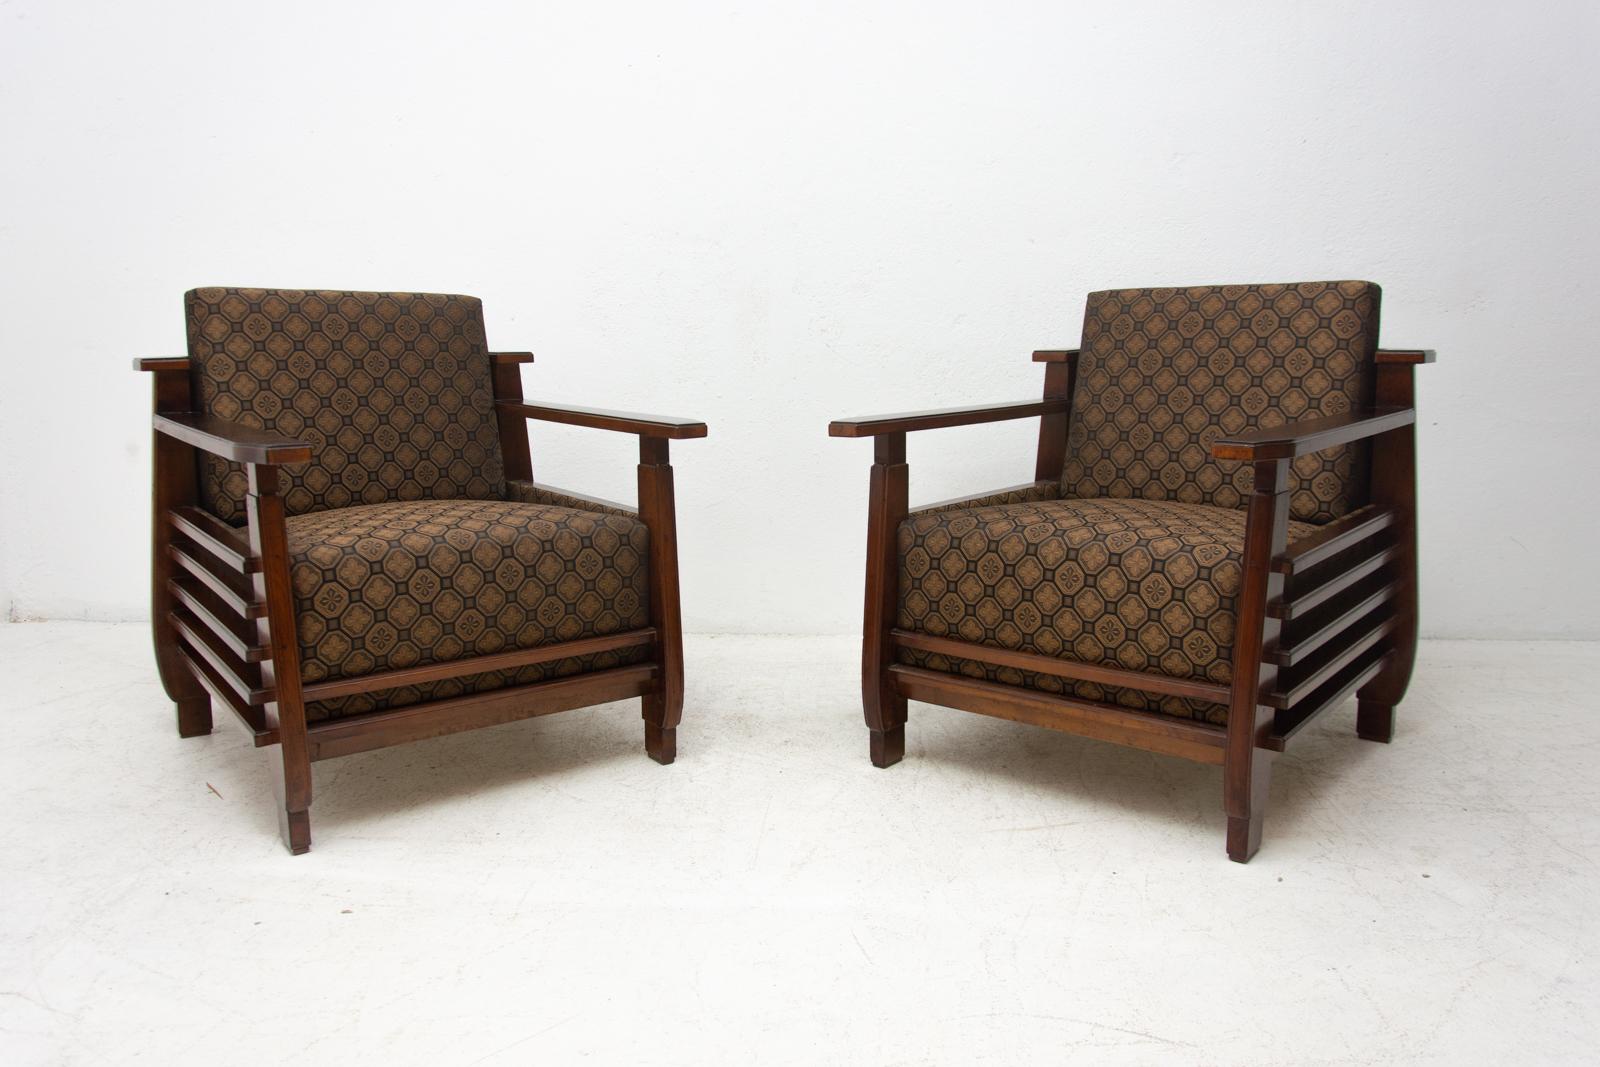 A pair of functionalist armchairs, made in the 1930s in Vienna during the Bauhaus period.
The armchairs are a typical example of the top Central European functionalist design of the 1930s.
In the case of these armchairs, the functionalist design